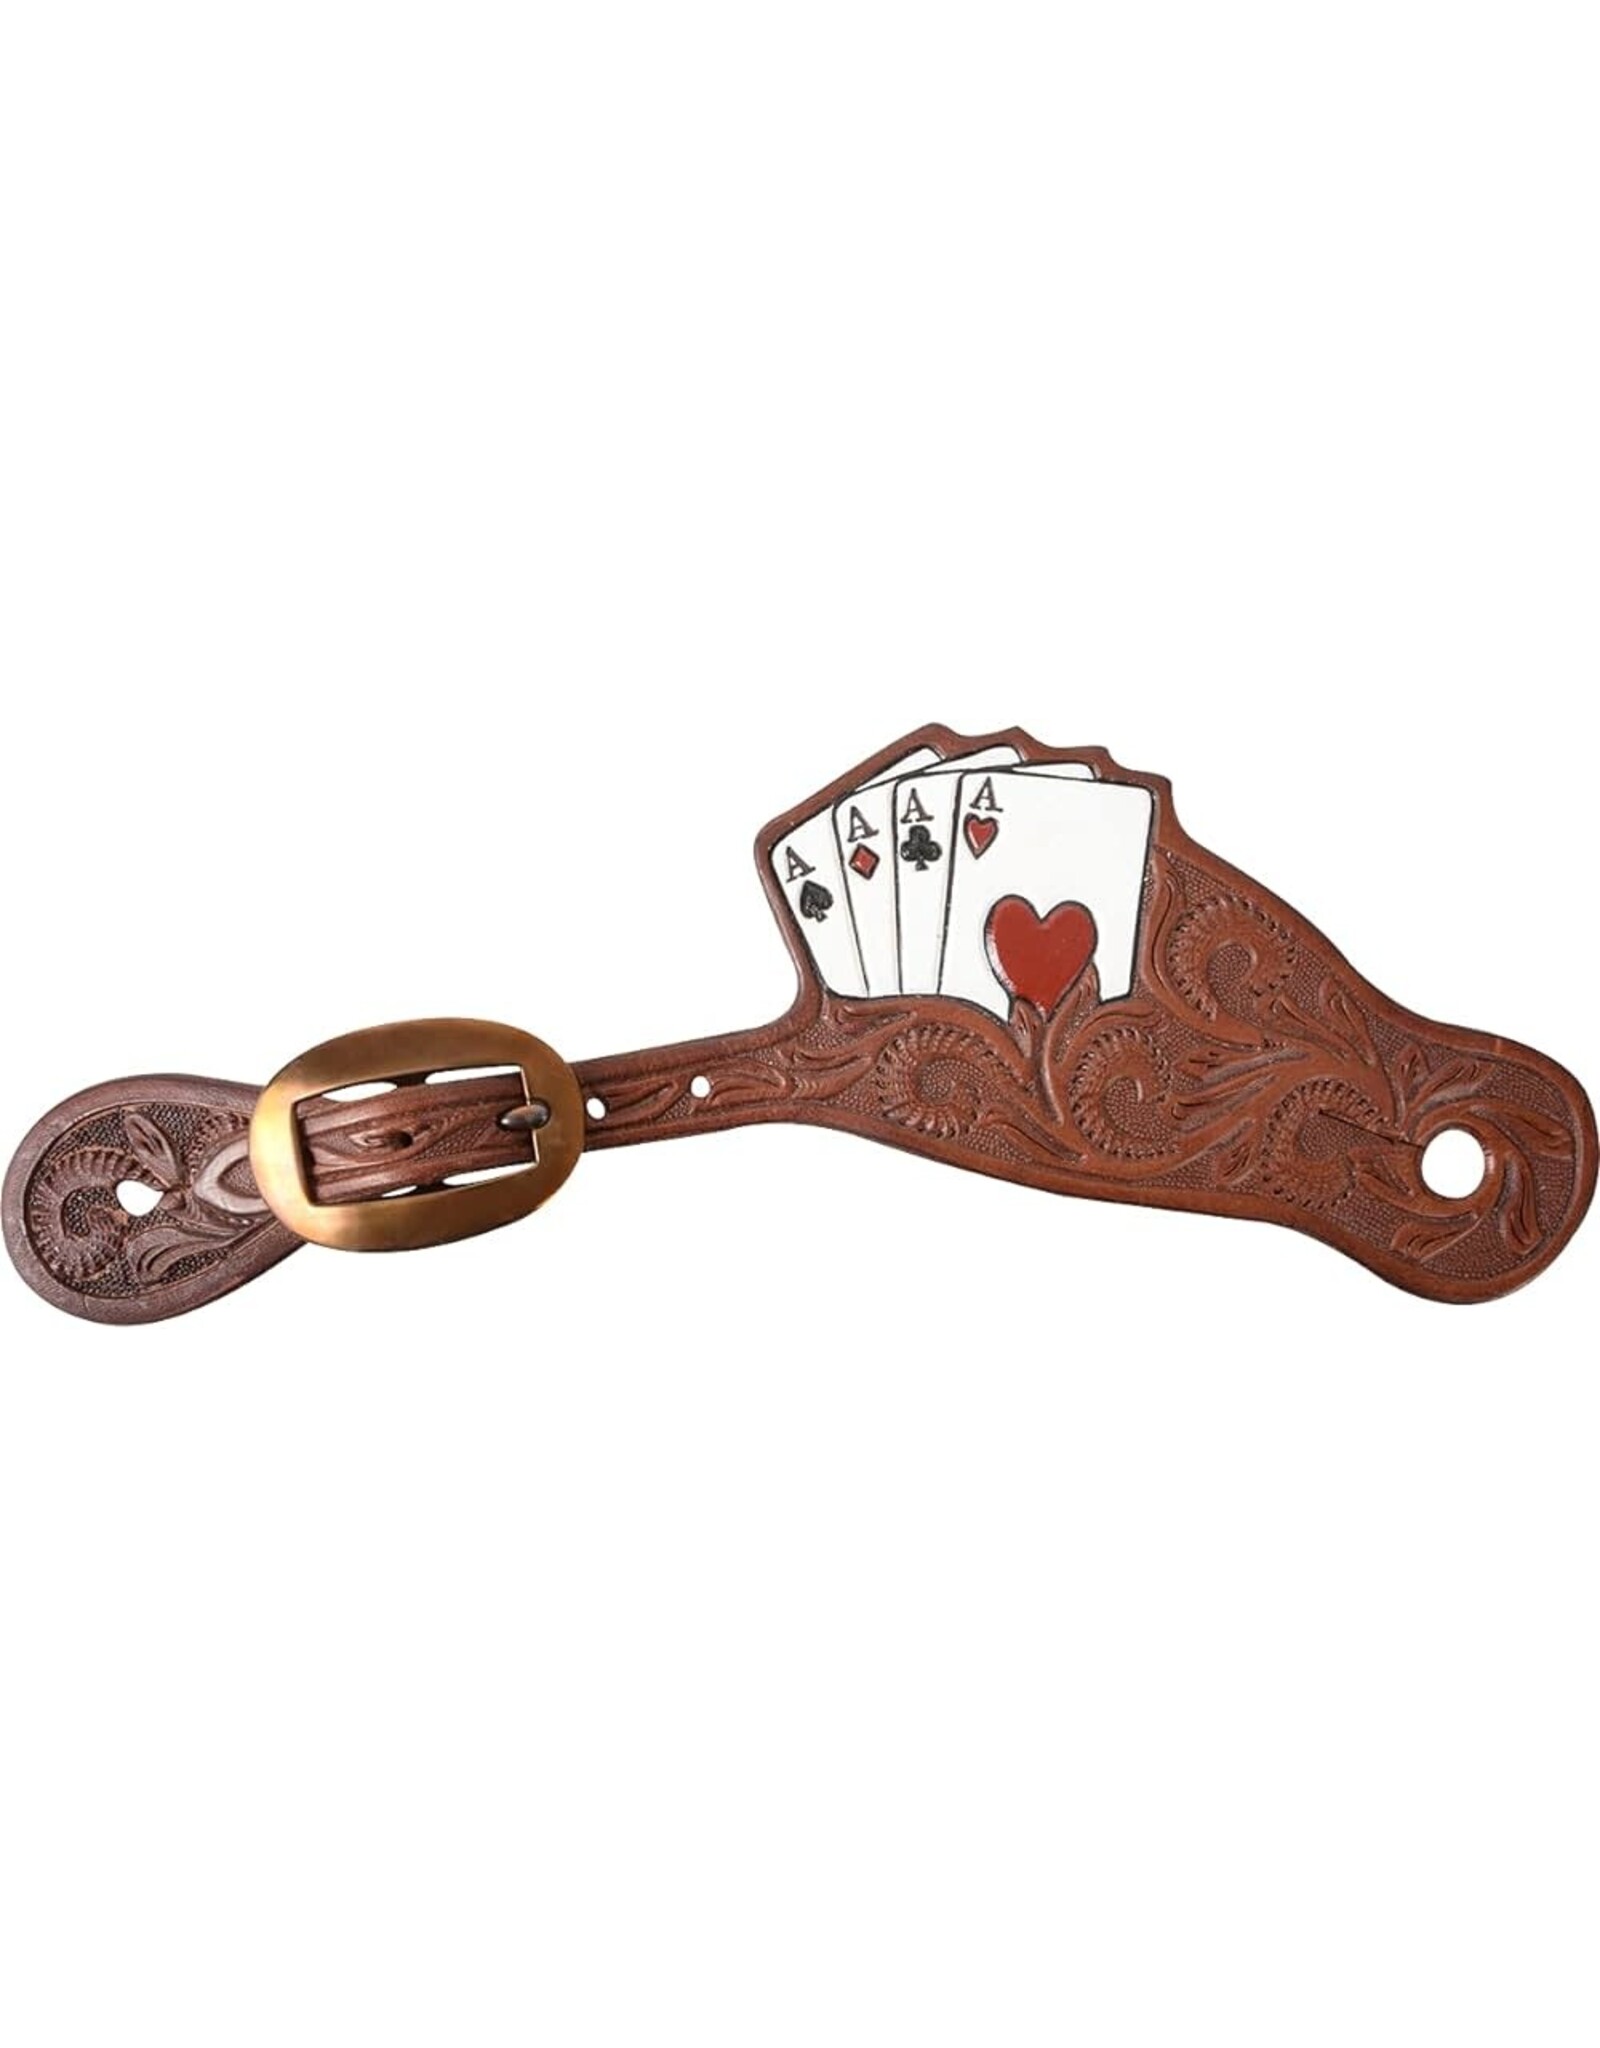 Martin Saddlery Tombstone Card Suit Spur Straps SSCSCS